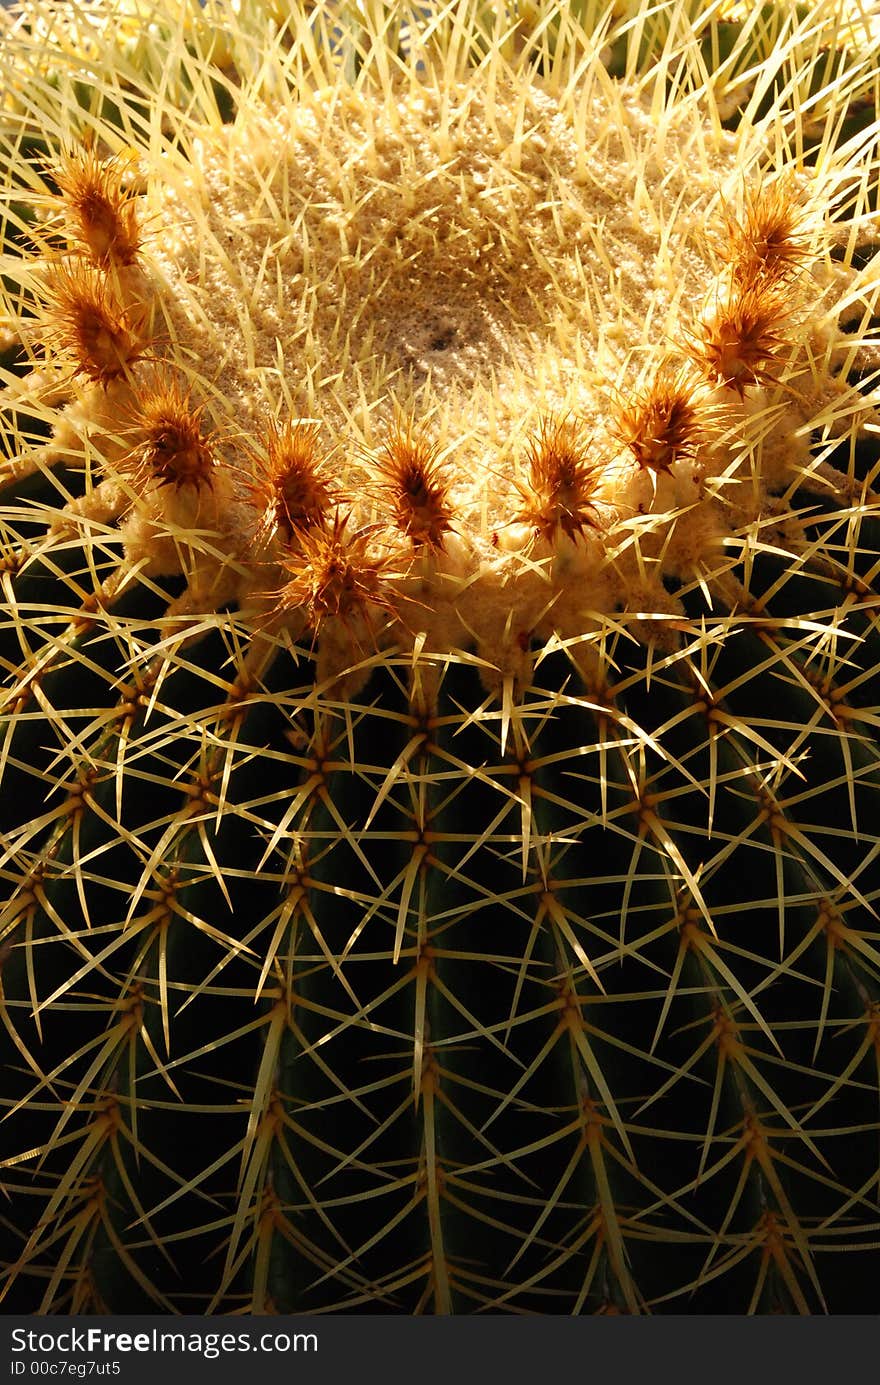 View of the side and circular top of a large, Golden Barrel Cactus, showing 3 inch long thorns and flowers.  Scientific name: echinocactus grusonii. View of the side and circular top of a large, Golden Barrel Cactus, showing 3 inch long thorns and flowers.  Scientific name: echinocactus grusonii.